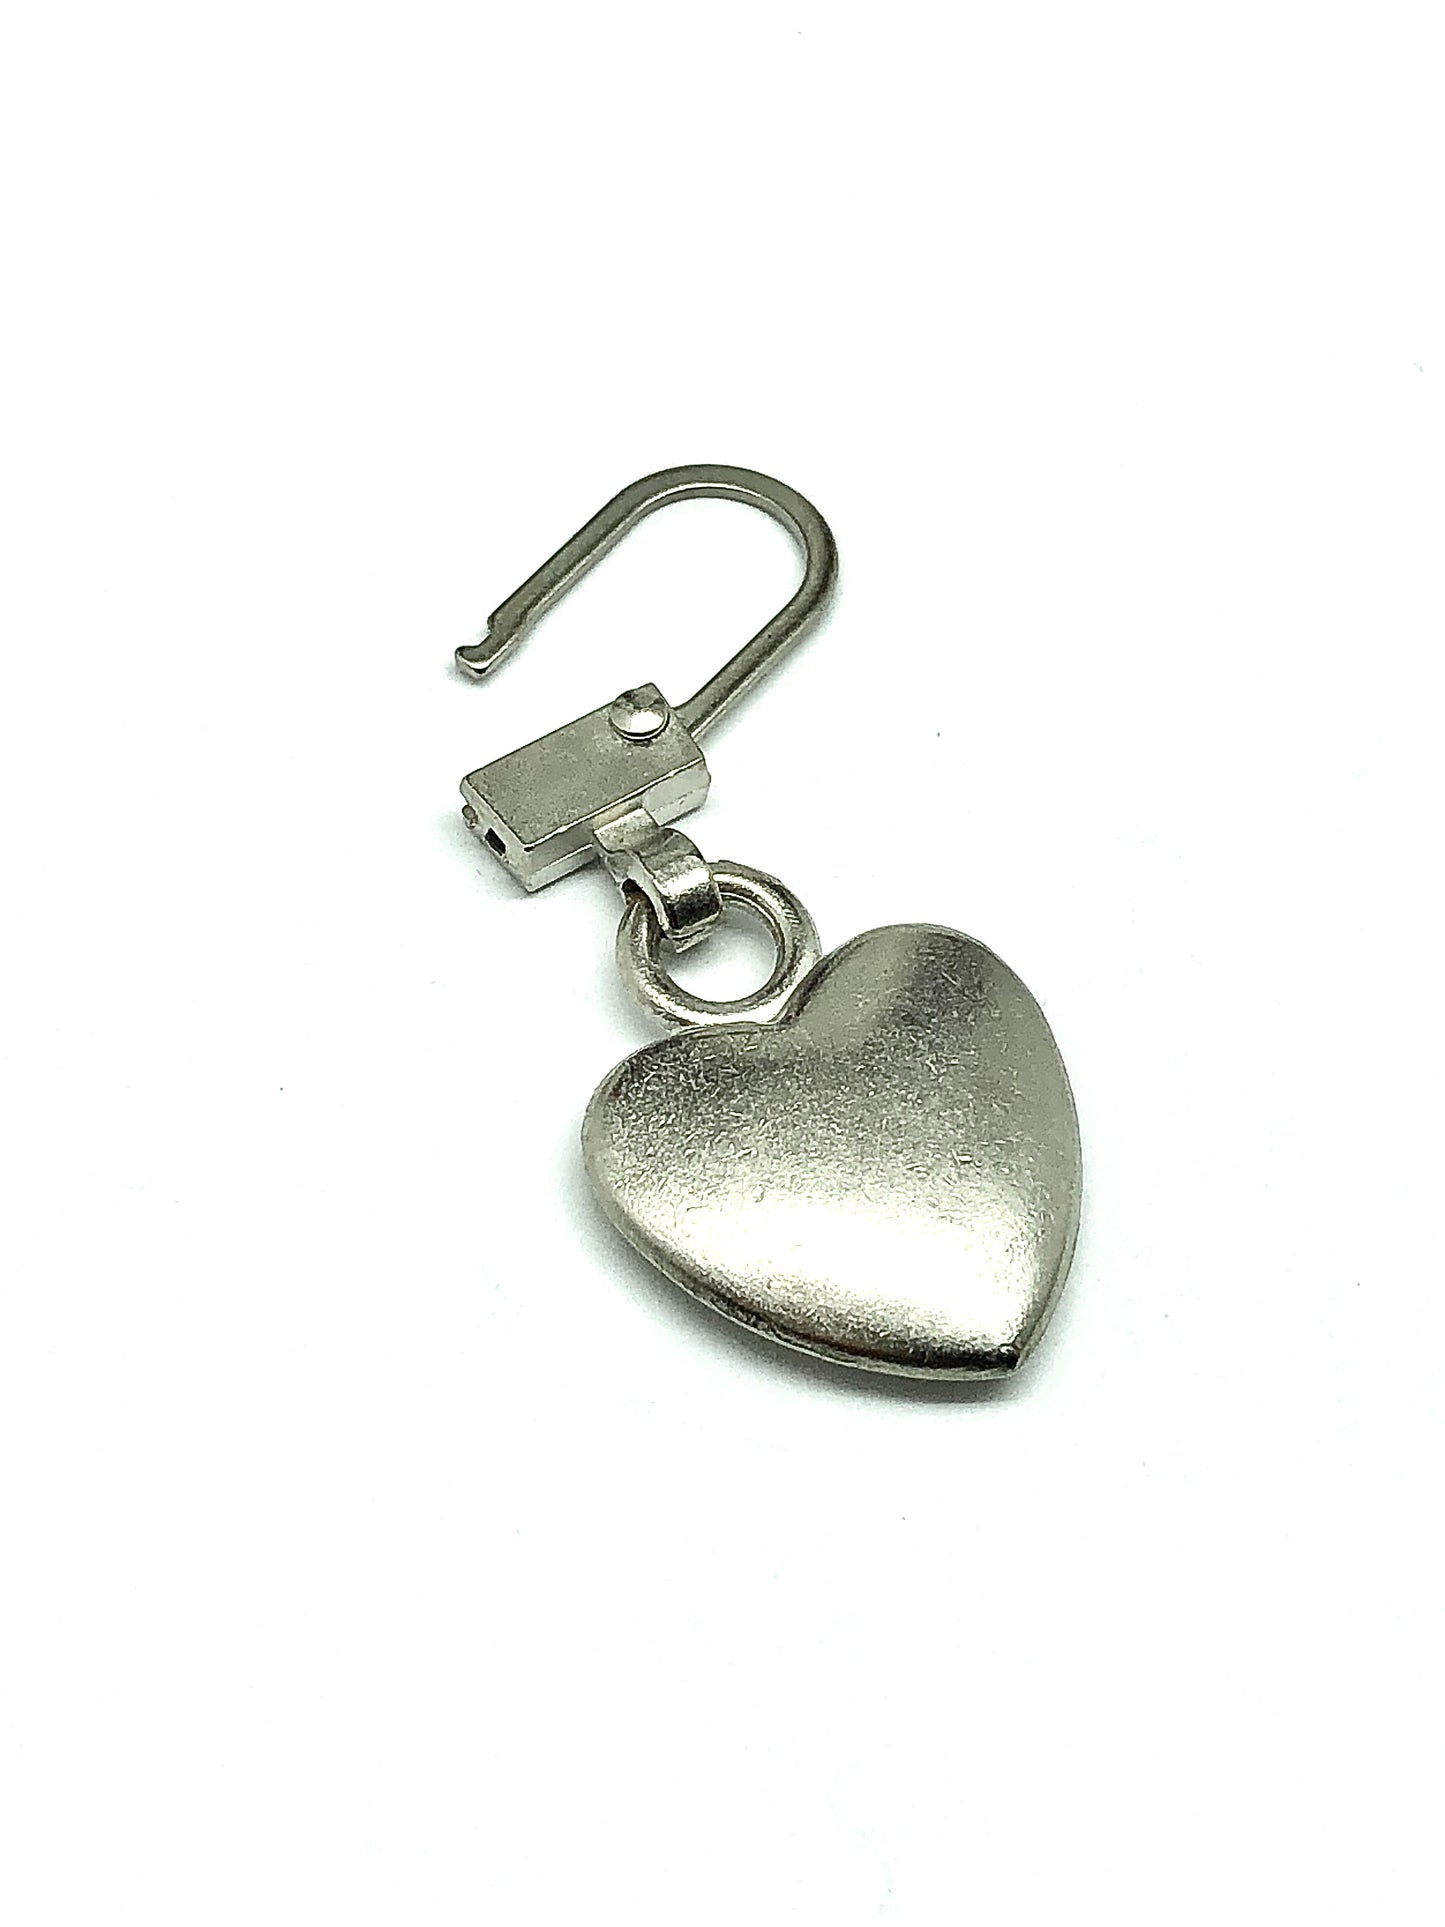 Zipper Pull Repair Heart Charm - Rustic Rose Gold for Repair or Decorate  anything it can clip onto!